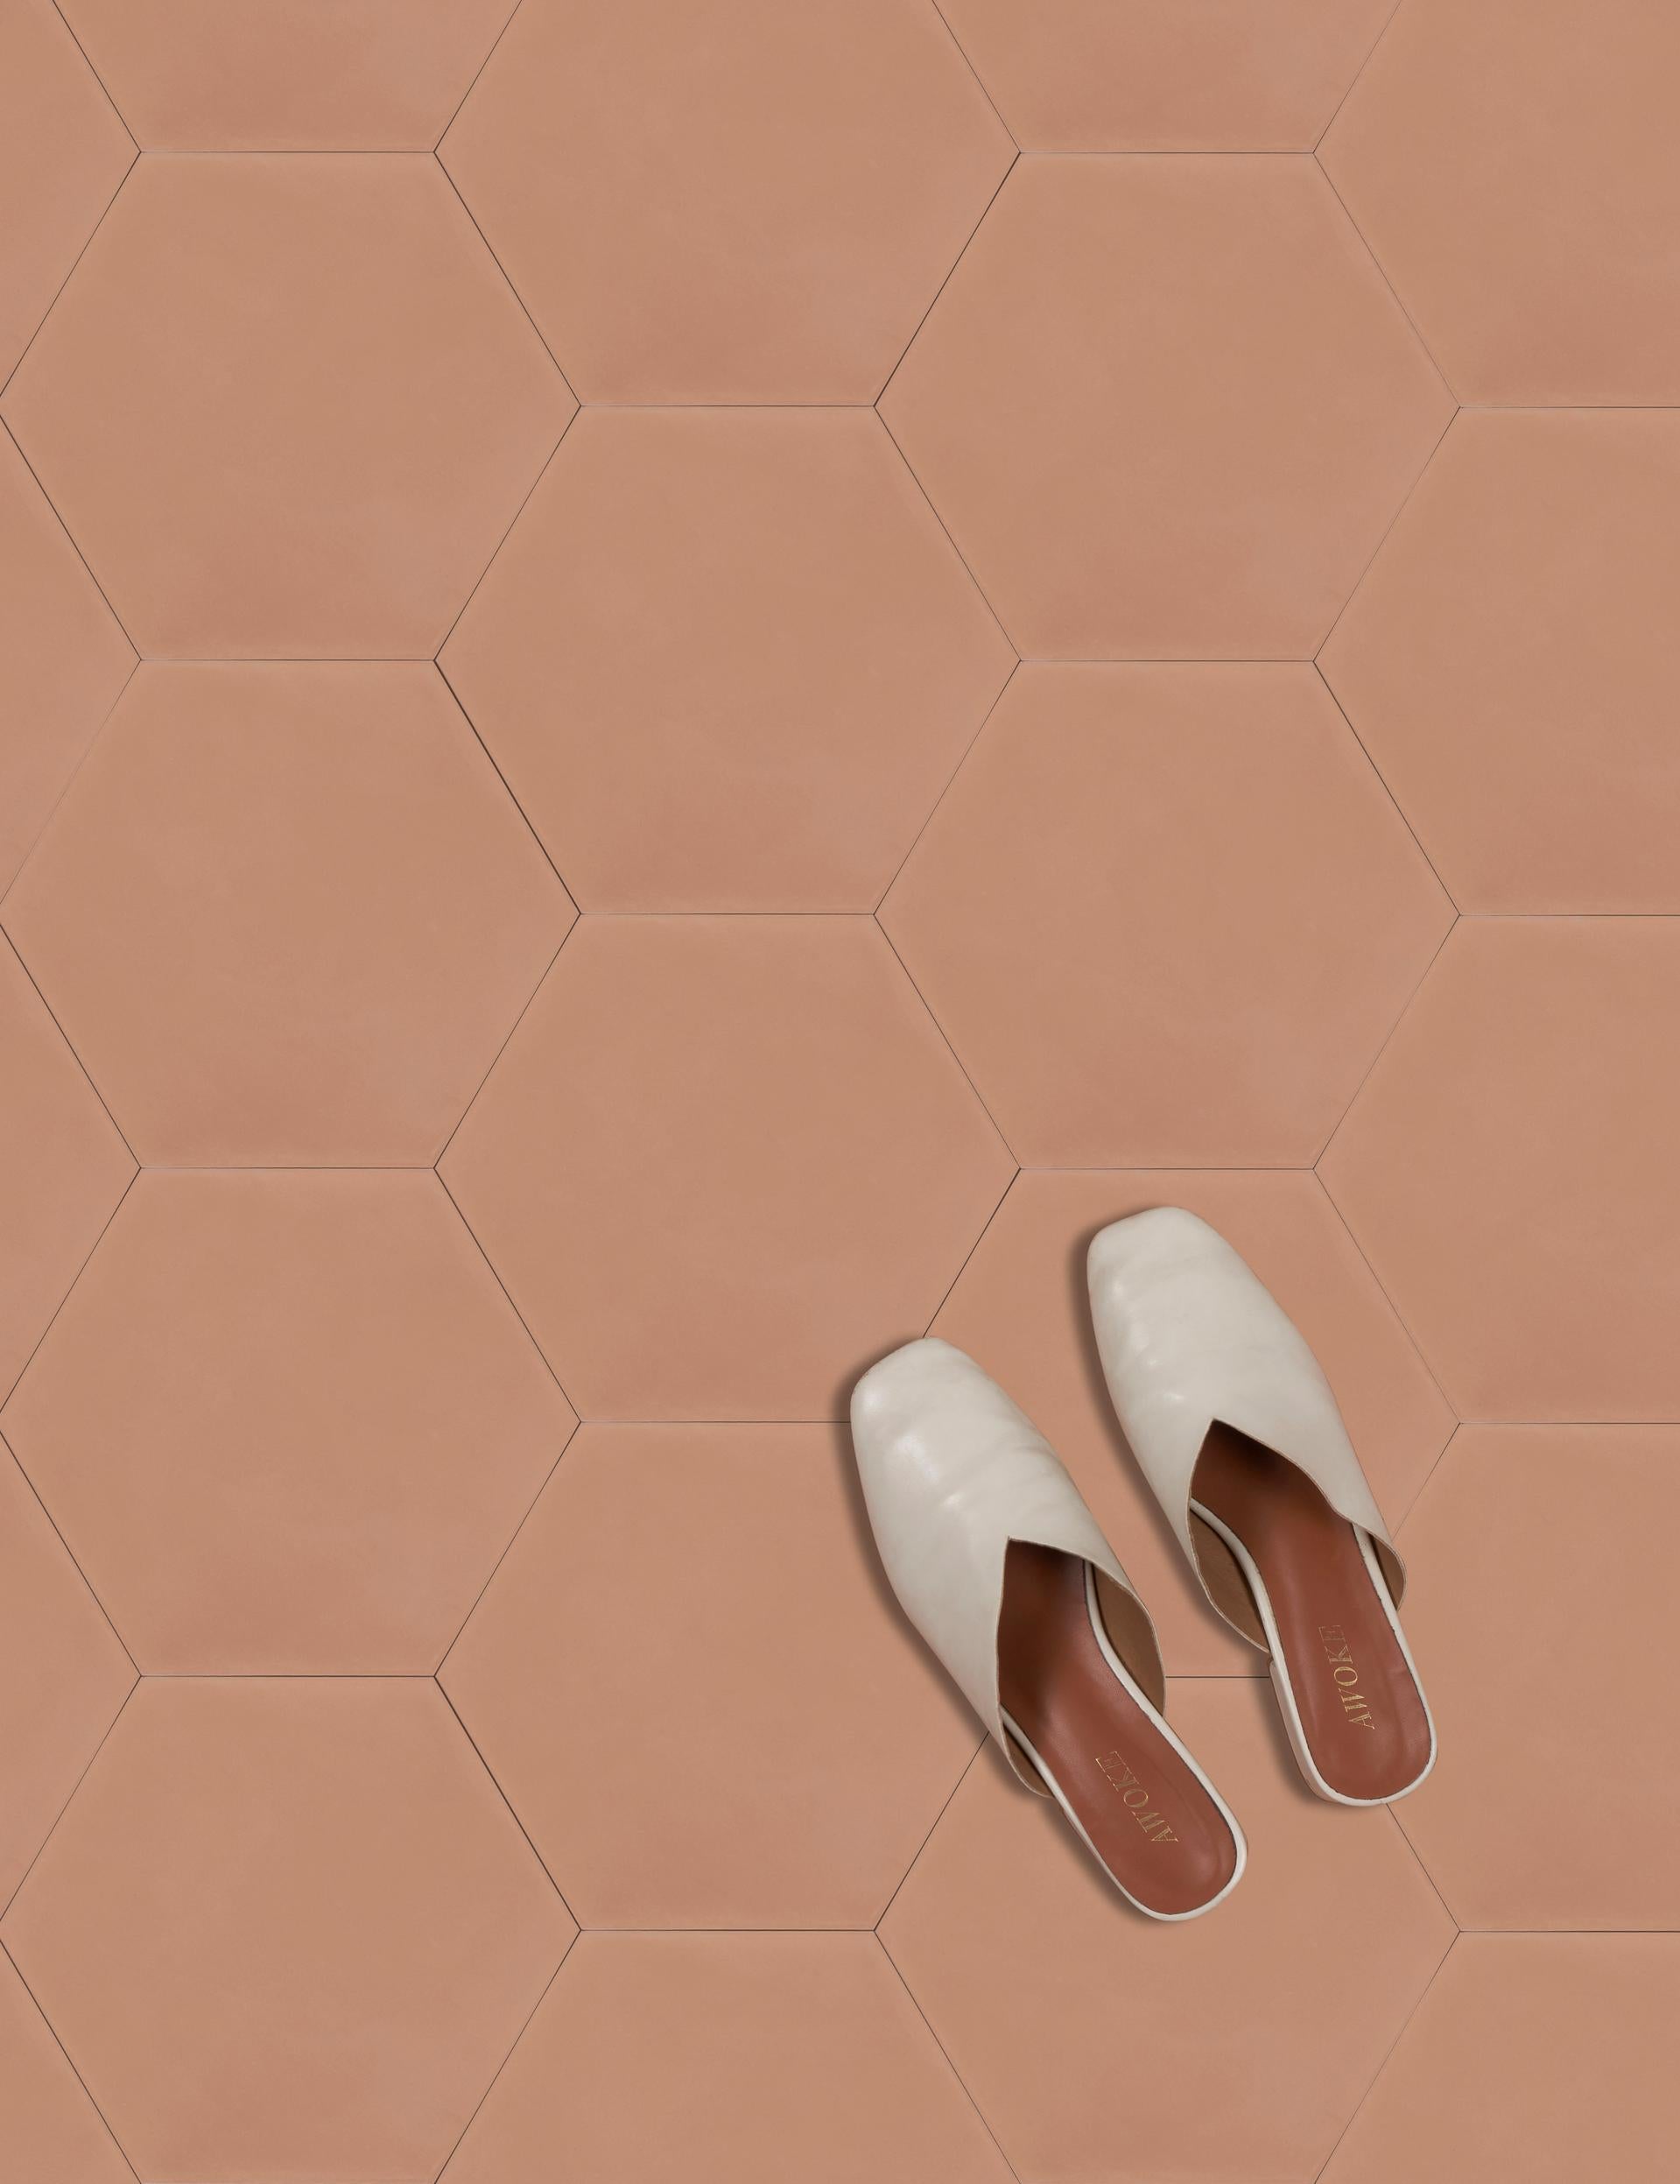 Available in our full palette in both cement and ceramic tile, these solid-shade hexagonal tiles can stand alone or mix with other colors to create a multi-color surface. They can also be coordinated with our moon phase tiles for a calming mix of